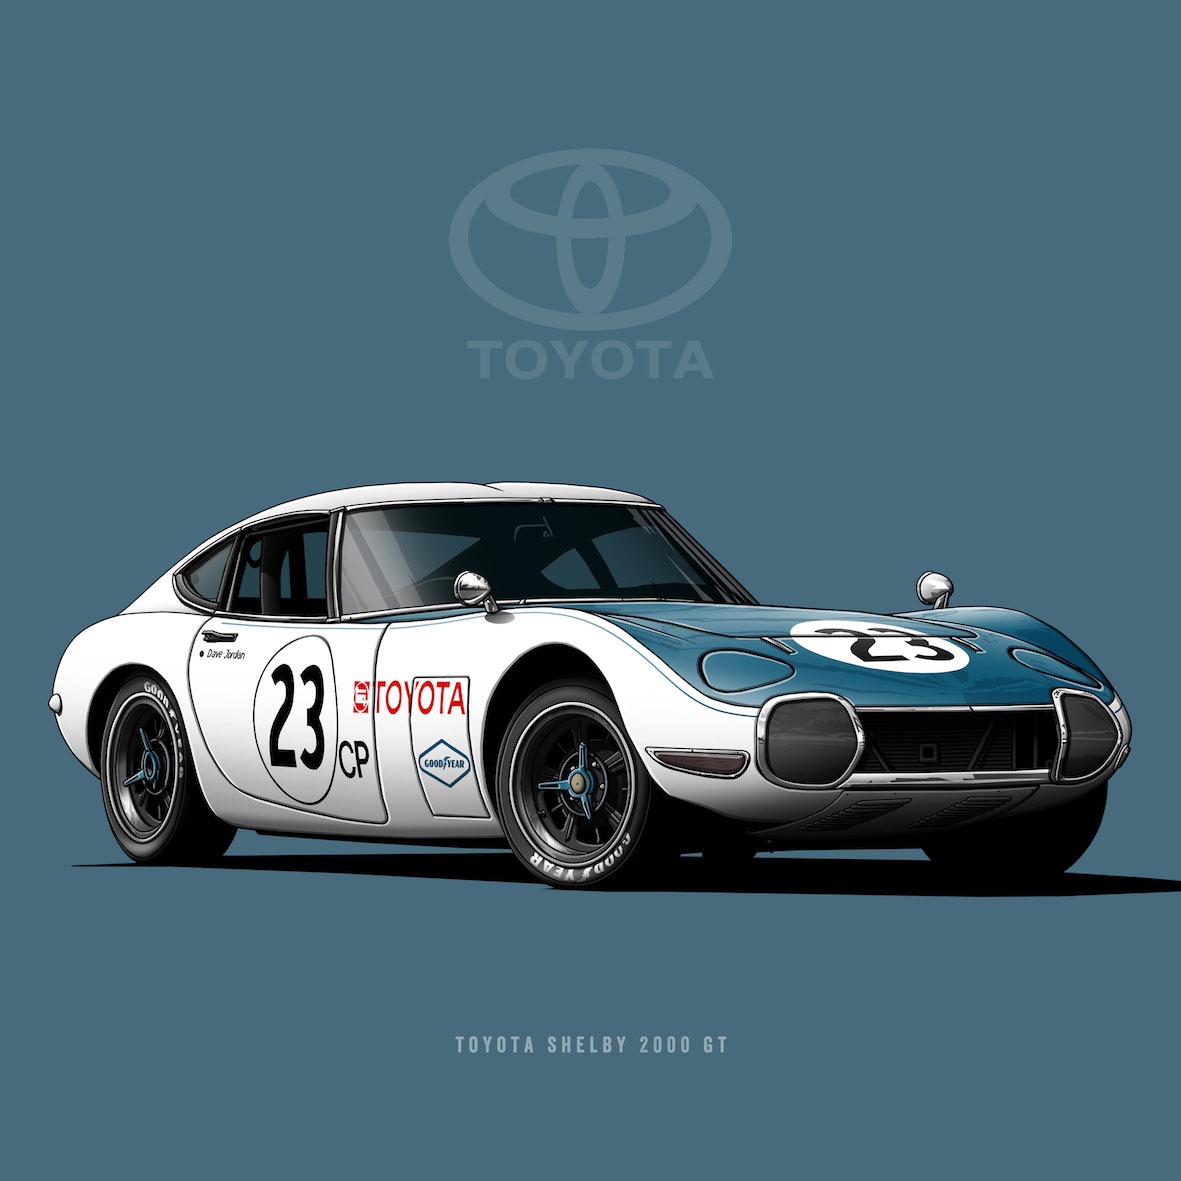 Toyota Shelby 2000 GT 1